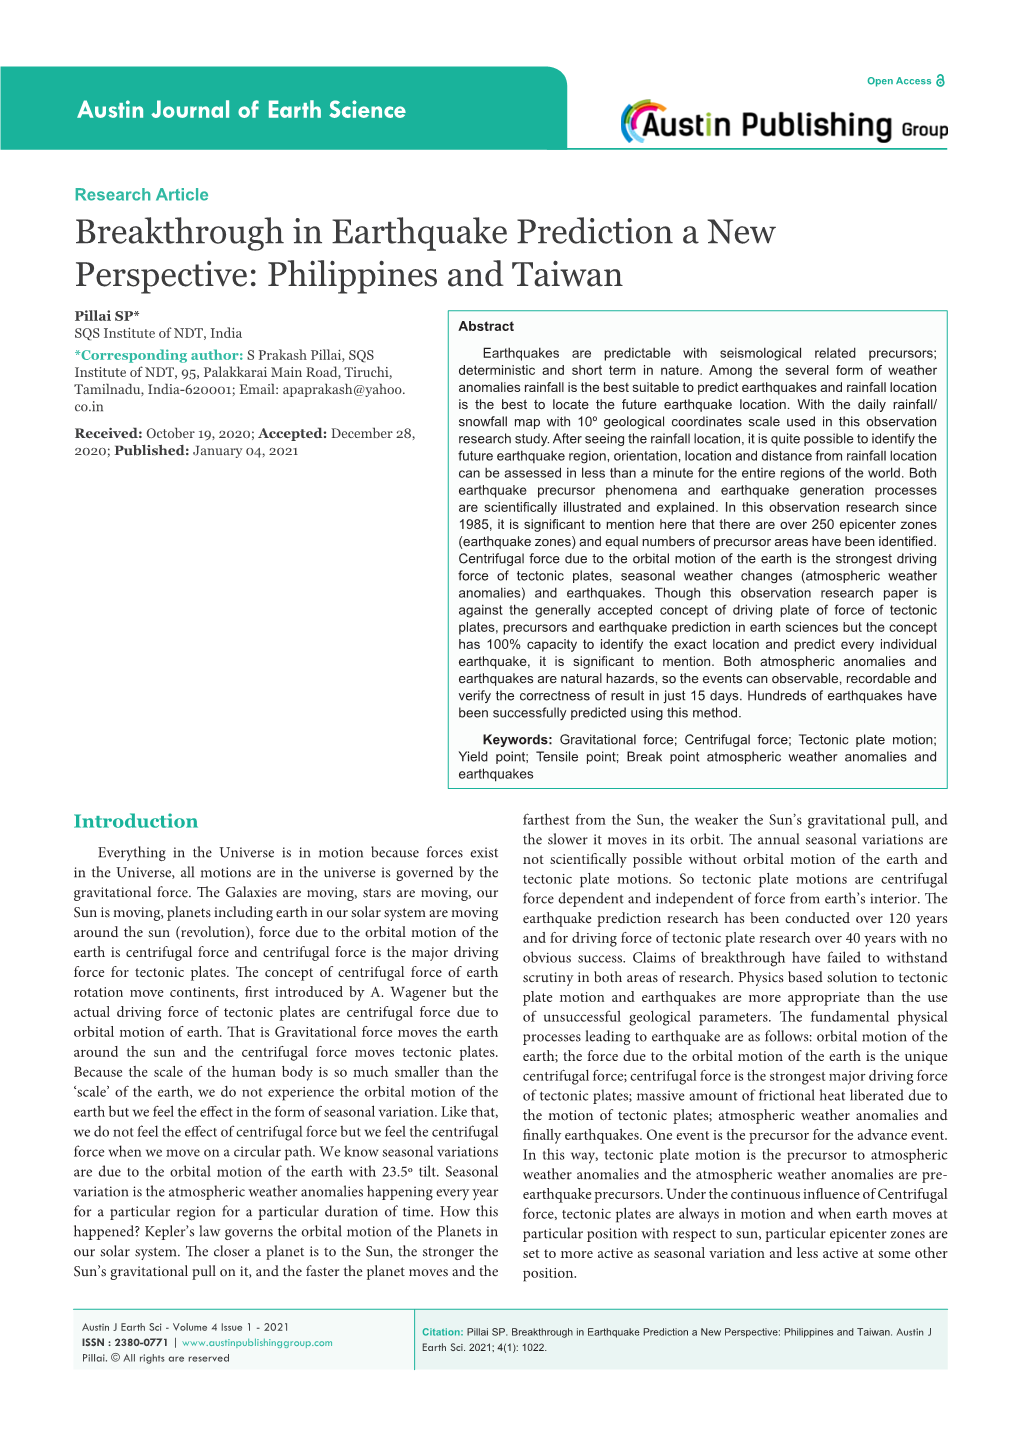 Pillai SP. Breakthrough in Earthquake Prediction a New Perspective: Philippines and Taiwan